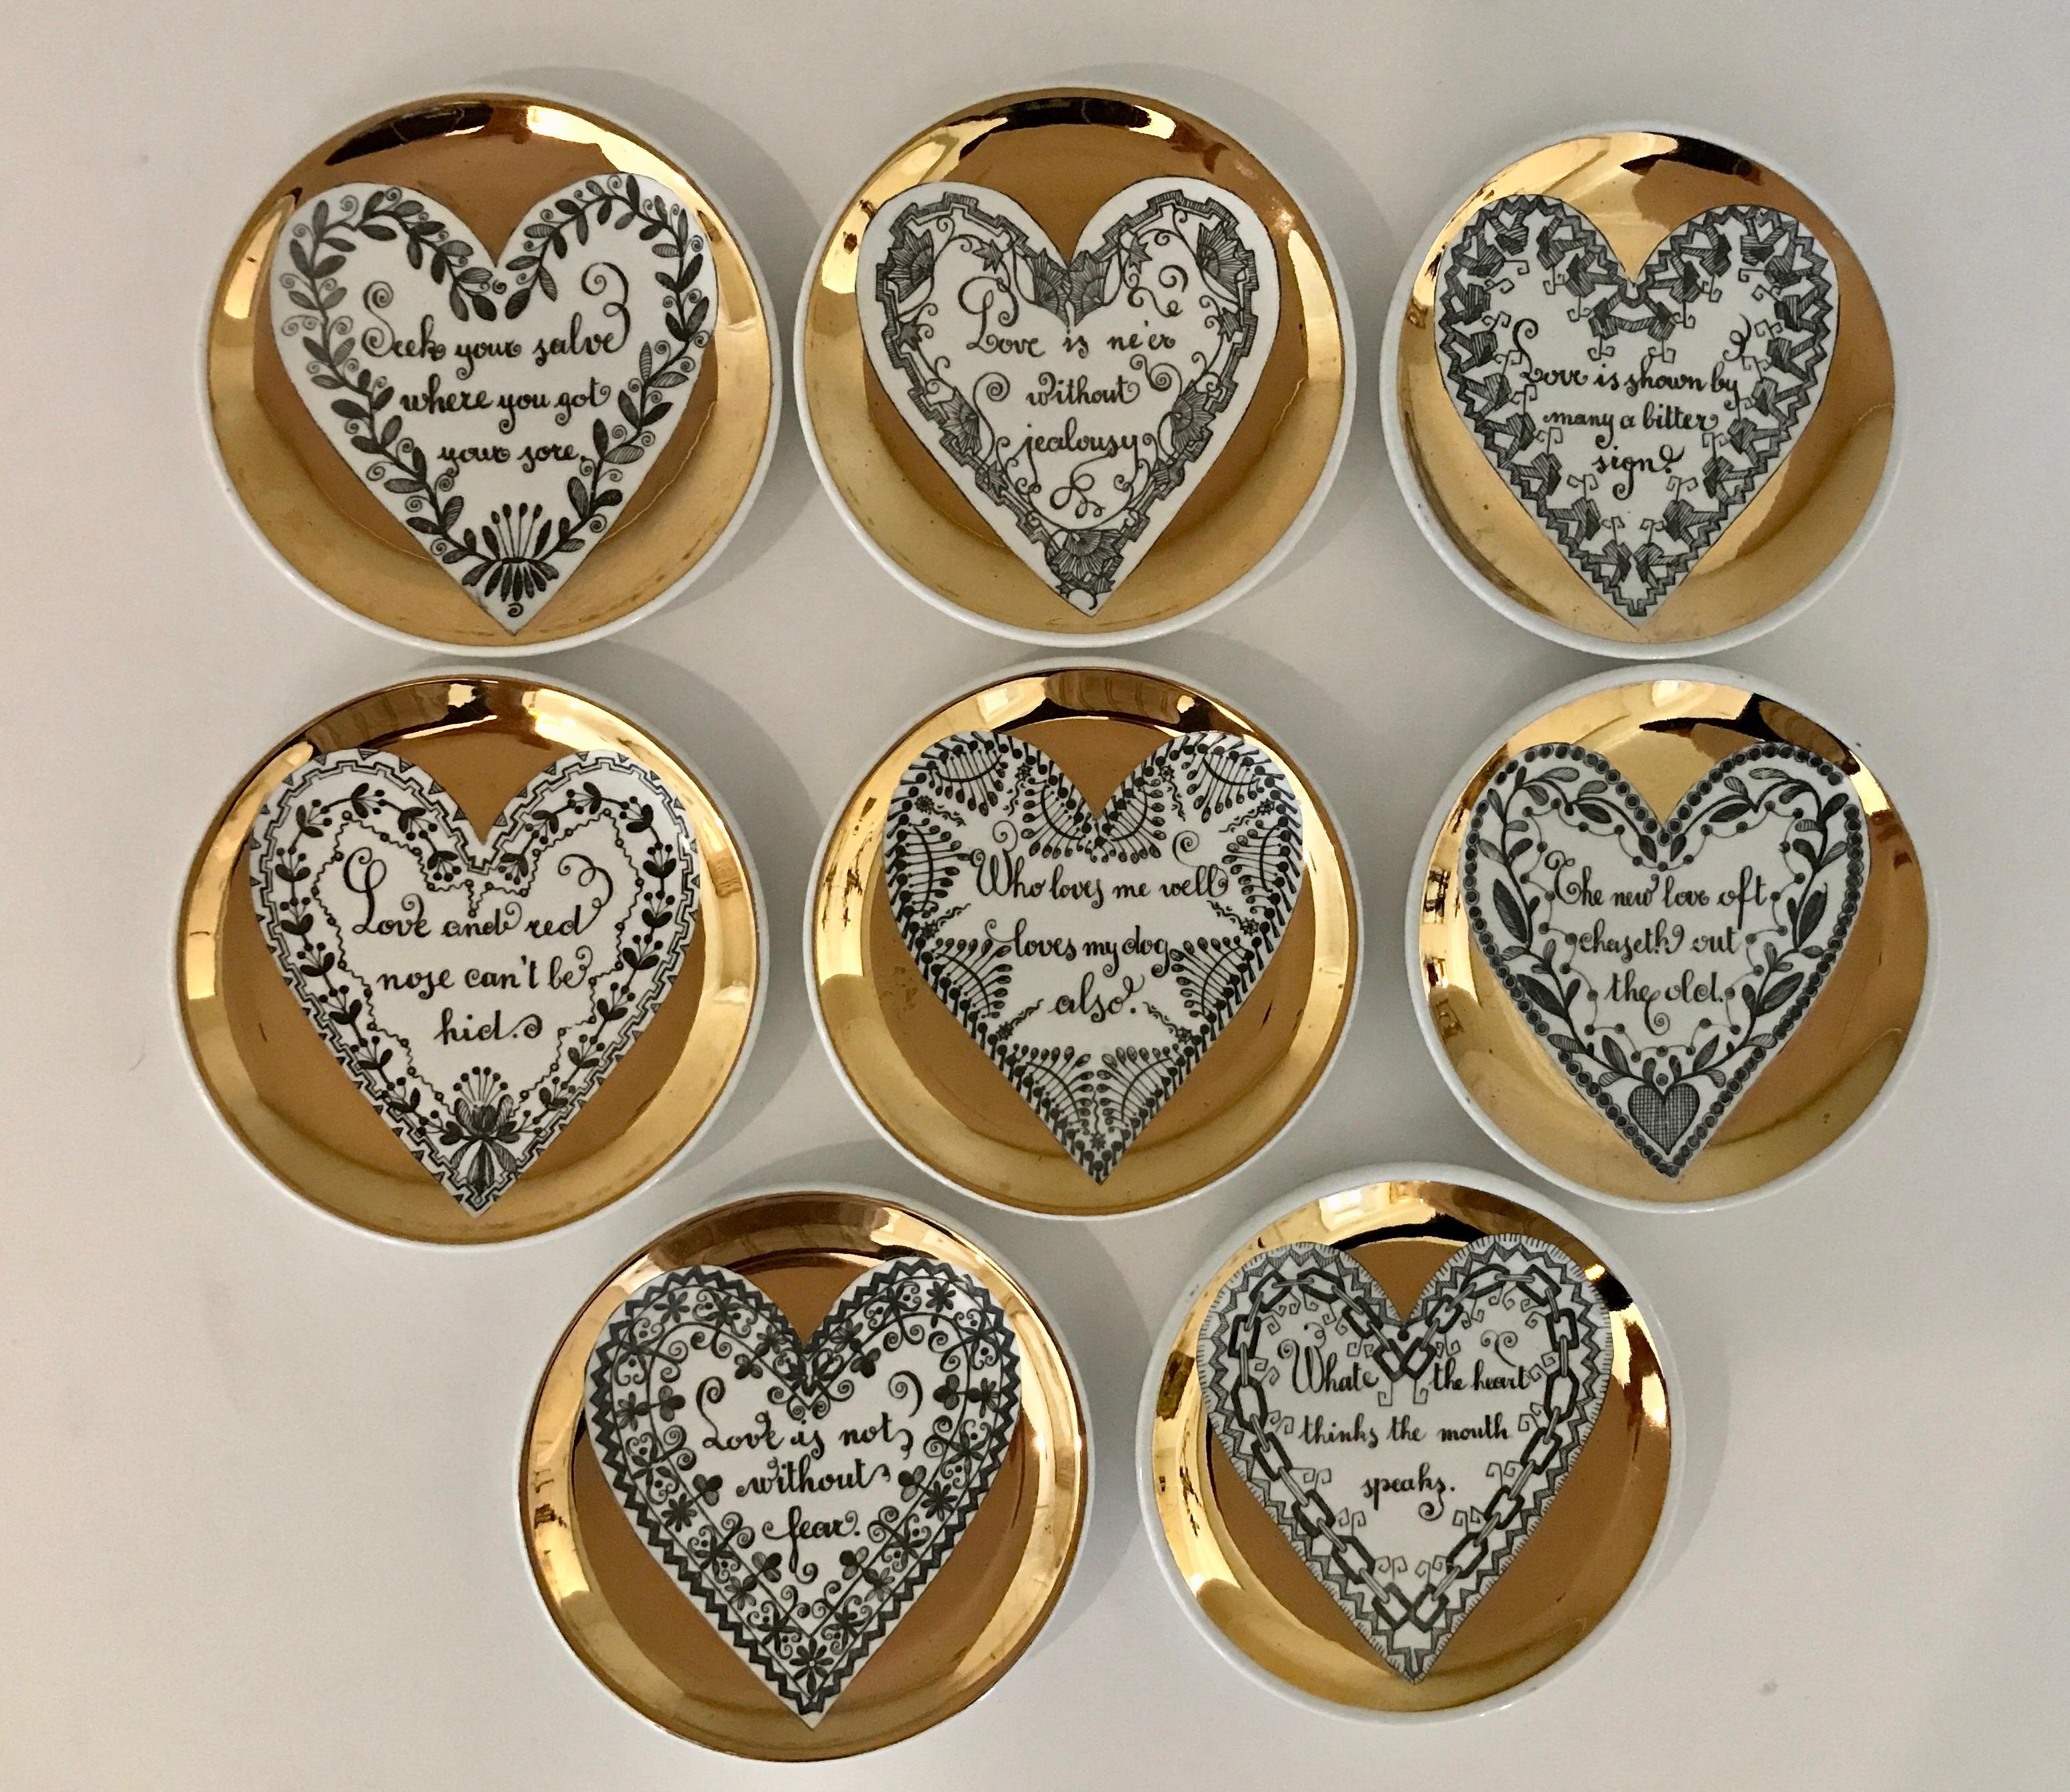 A full set of 8 LOVE series coasters by Piero Fornasetti. Each coaster has a gold border surrounding a heart with its own unique motif surrounding a different saying or proverb. This series was not produced in large numbers and full sets are more